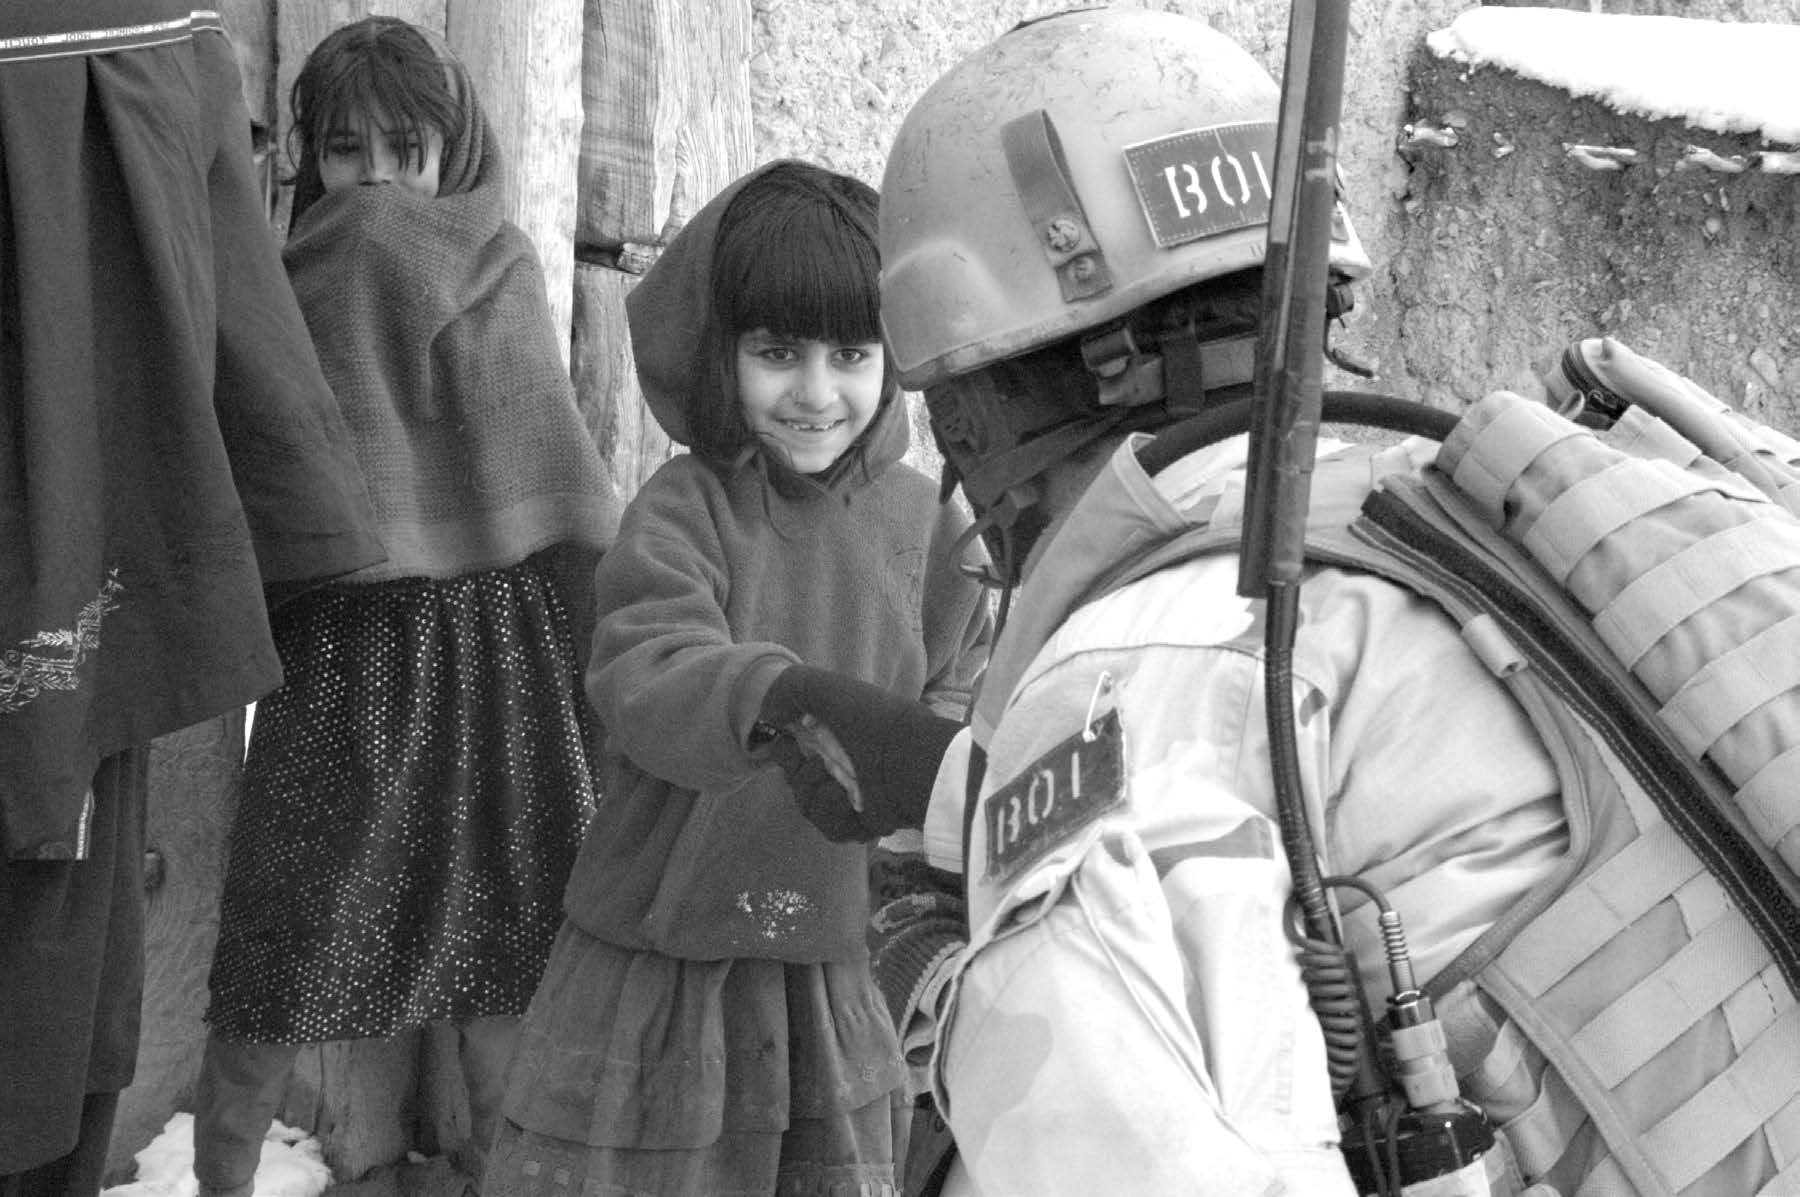 Colby Jenkins is shown shaking the hand of a young Afghan girl who lived in a nearby village. After the first snow of the winter arrived, they knew there would be many Afghans experiencing difficulties and suffering, so they ventured out to help where they could and took emergency supplies to those most in need. A piece of candy or something for the children was always well received. Courtesy of Colby Jenkins.